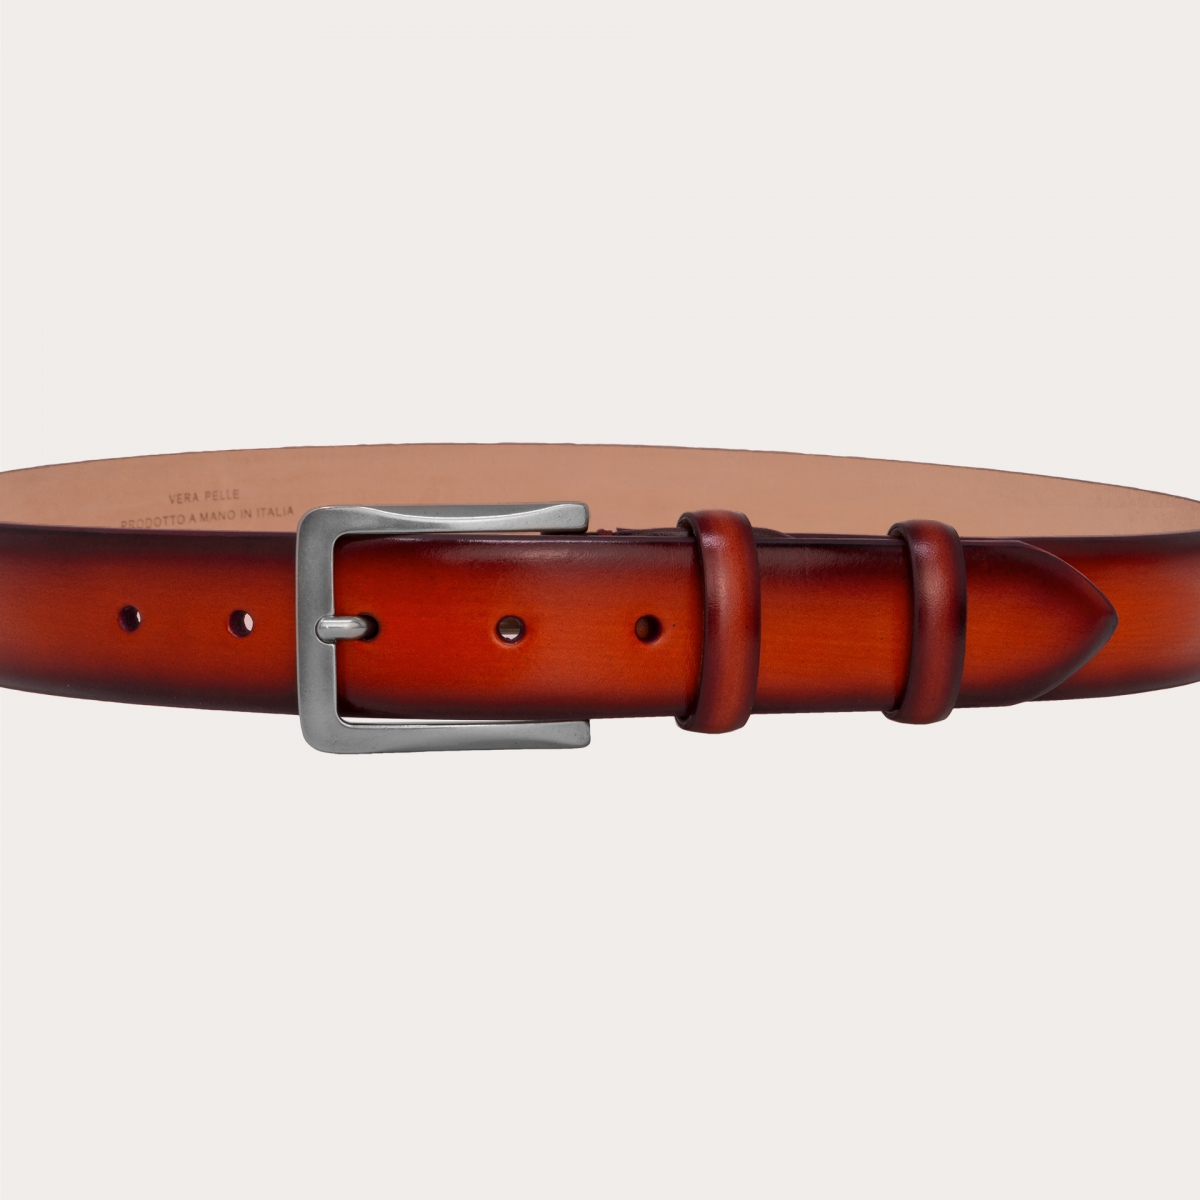 BRUCLE Trendy belt in hand-buffered and shaded leather, orange